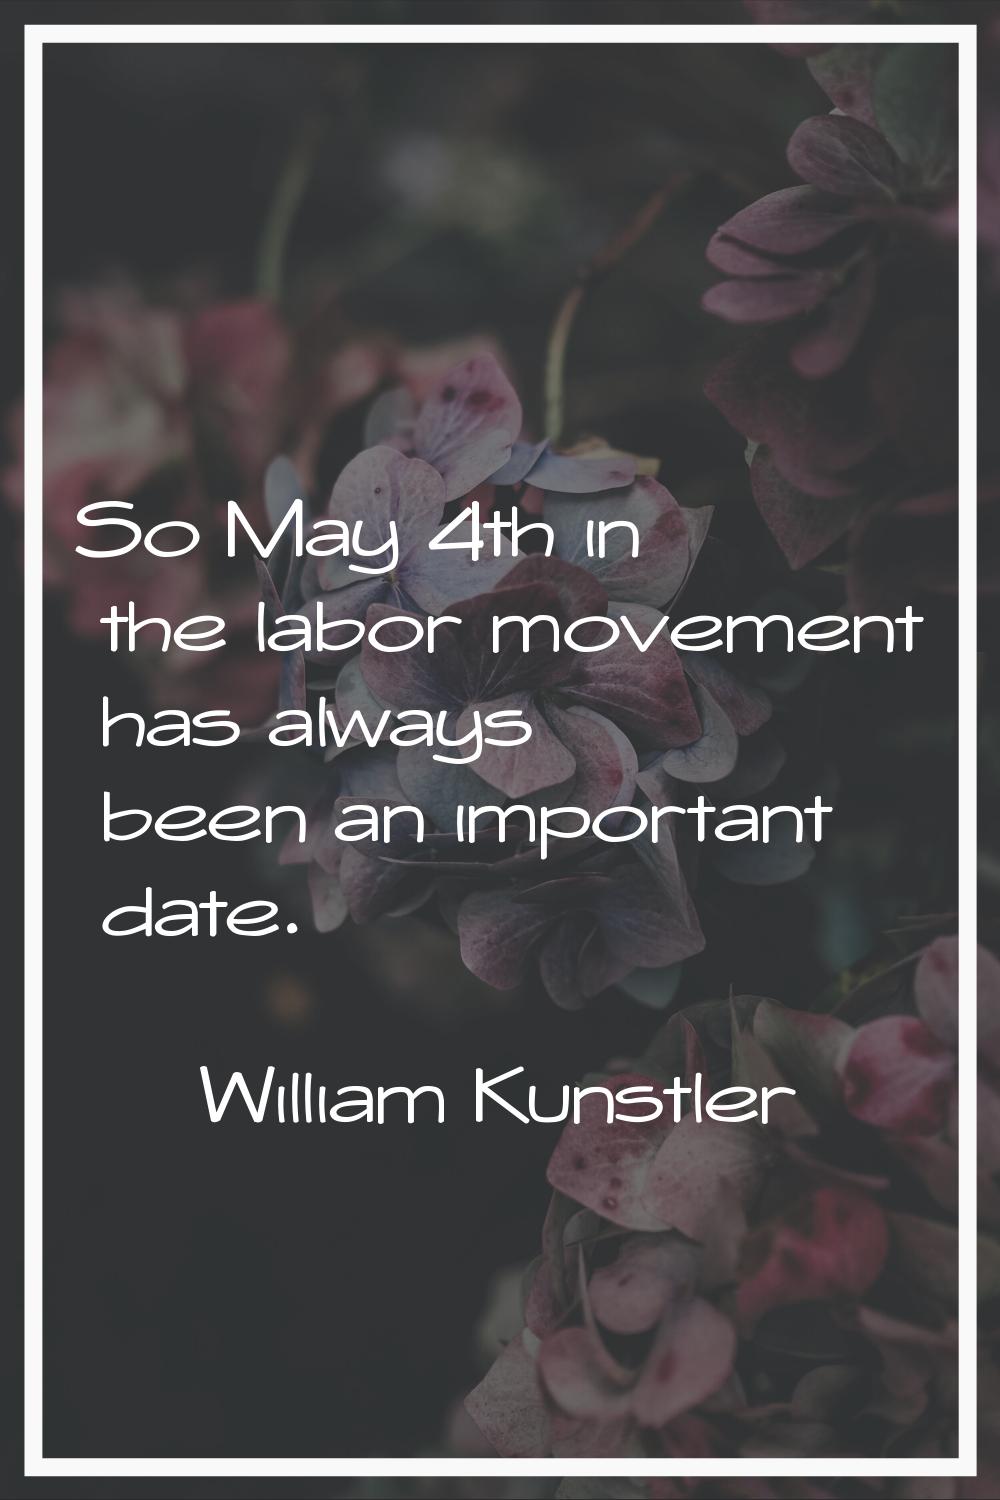 So May 4th in the labor movement has always been an important date.